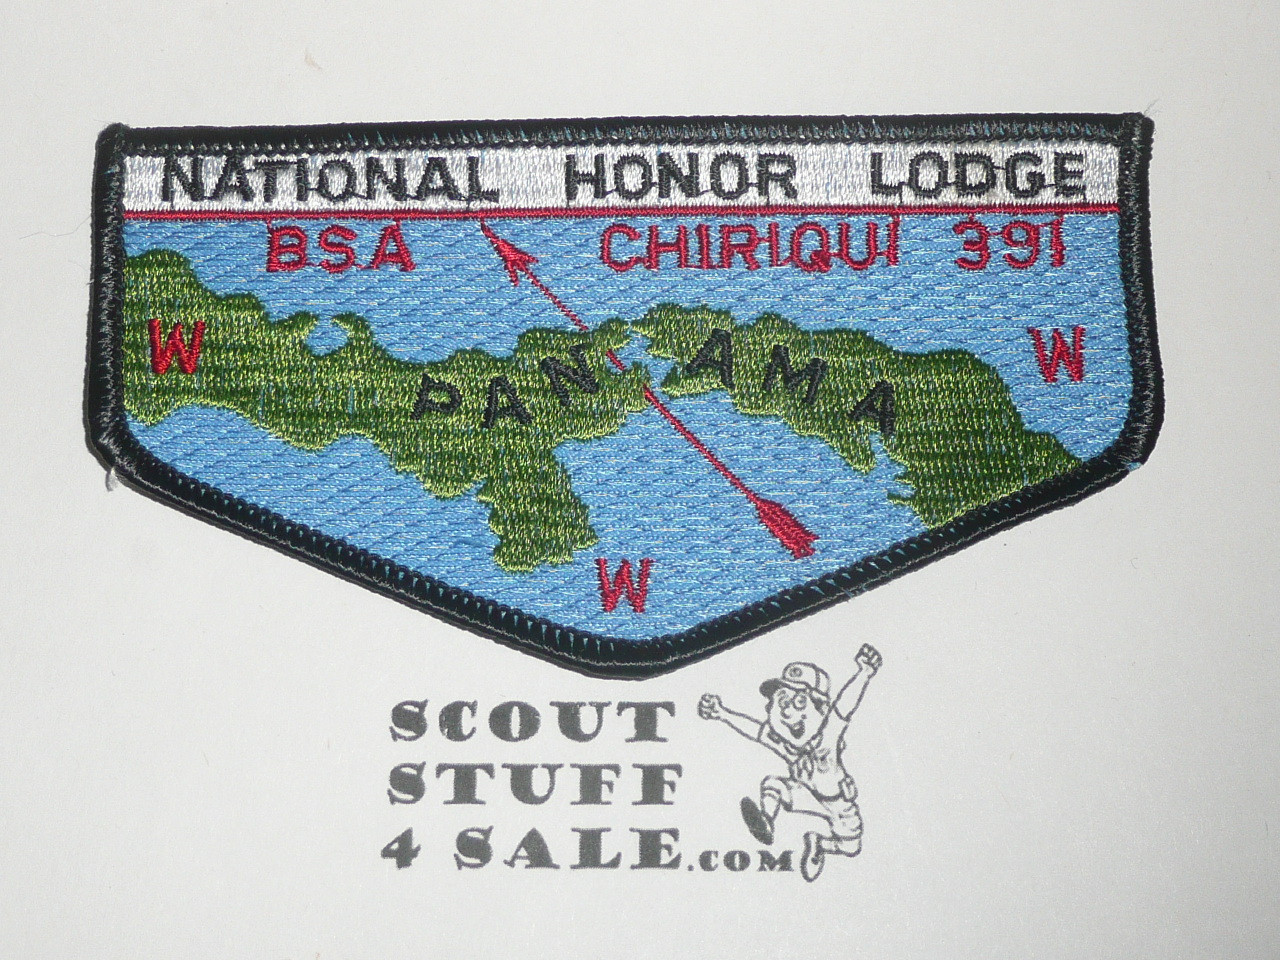 Order of the Arrow Lodge #391 Chiriqui s26 National Honor Lodge Flap Patch